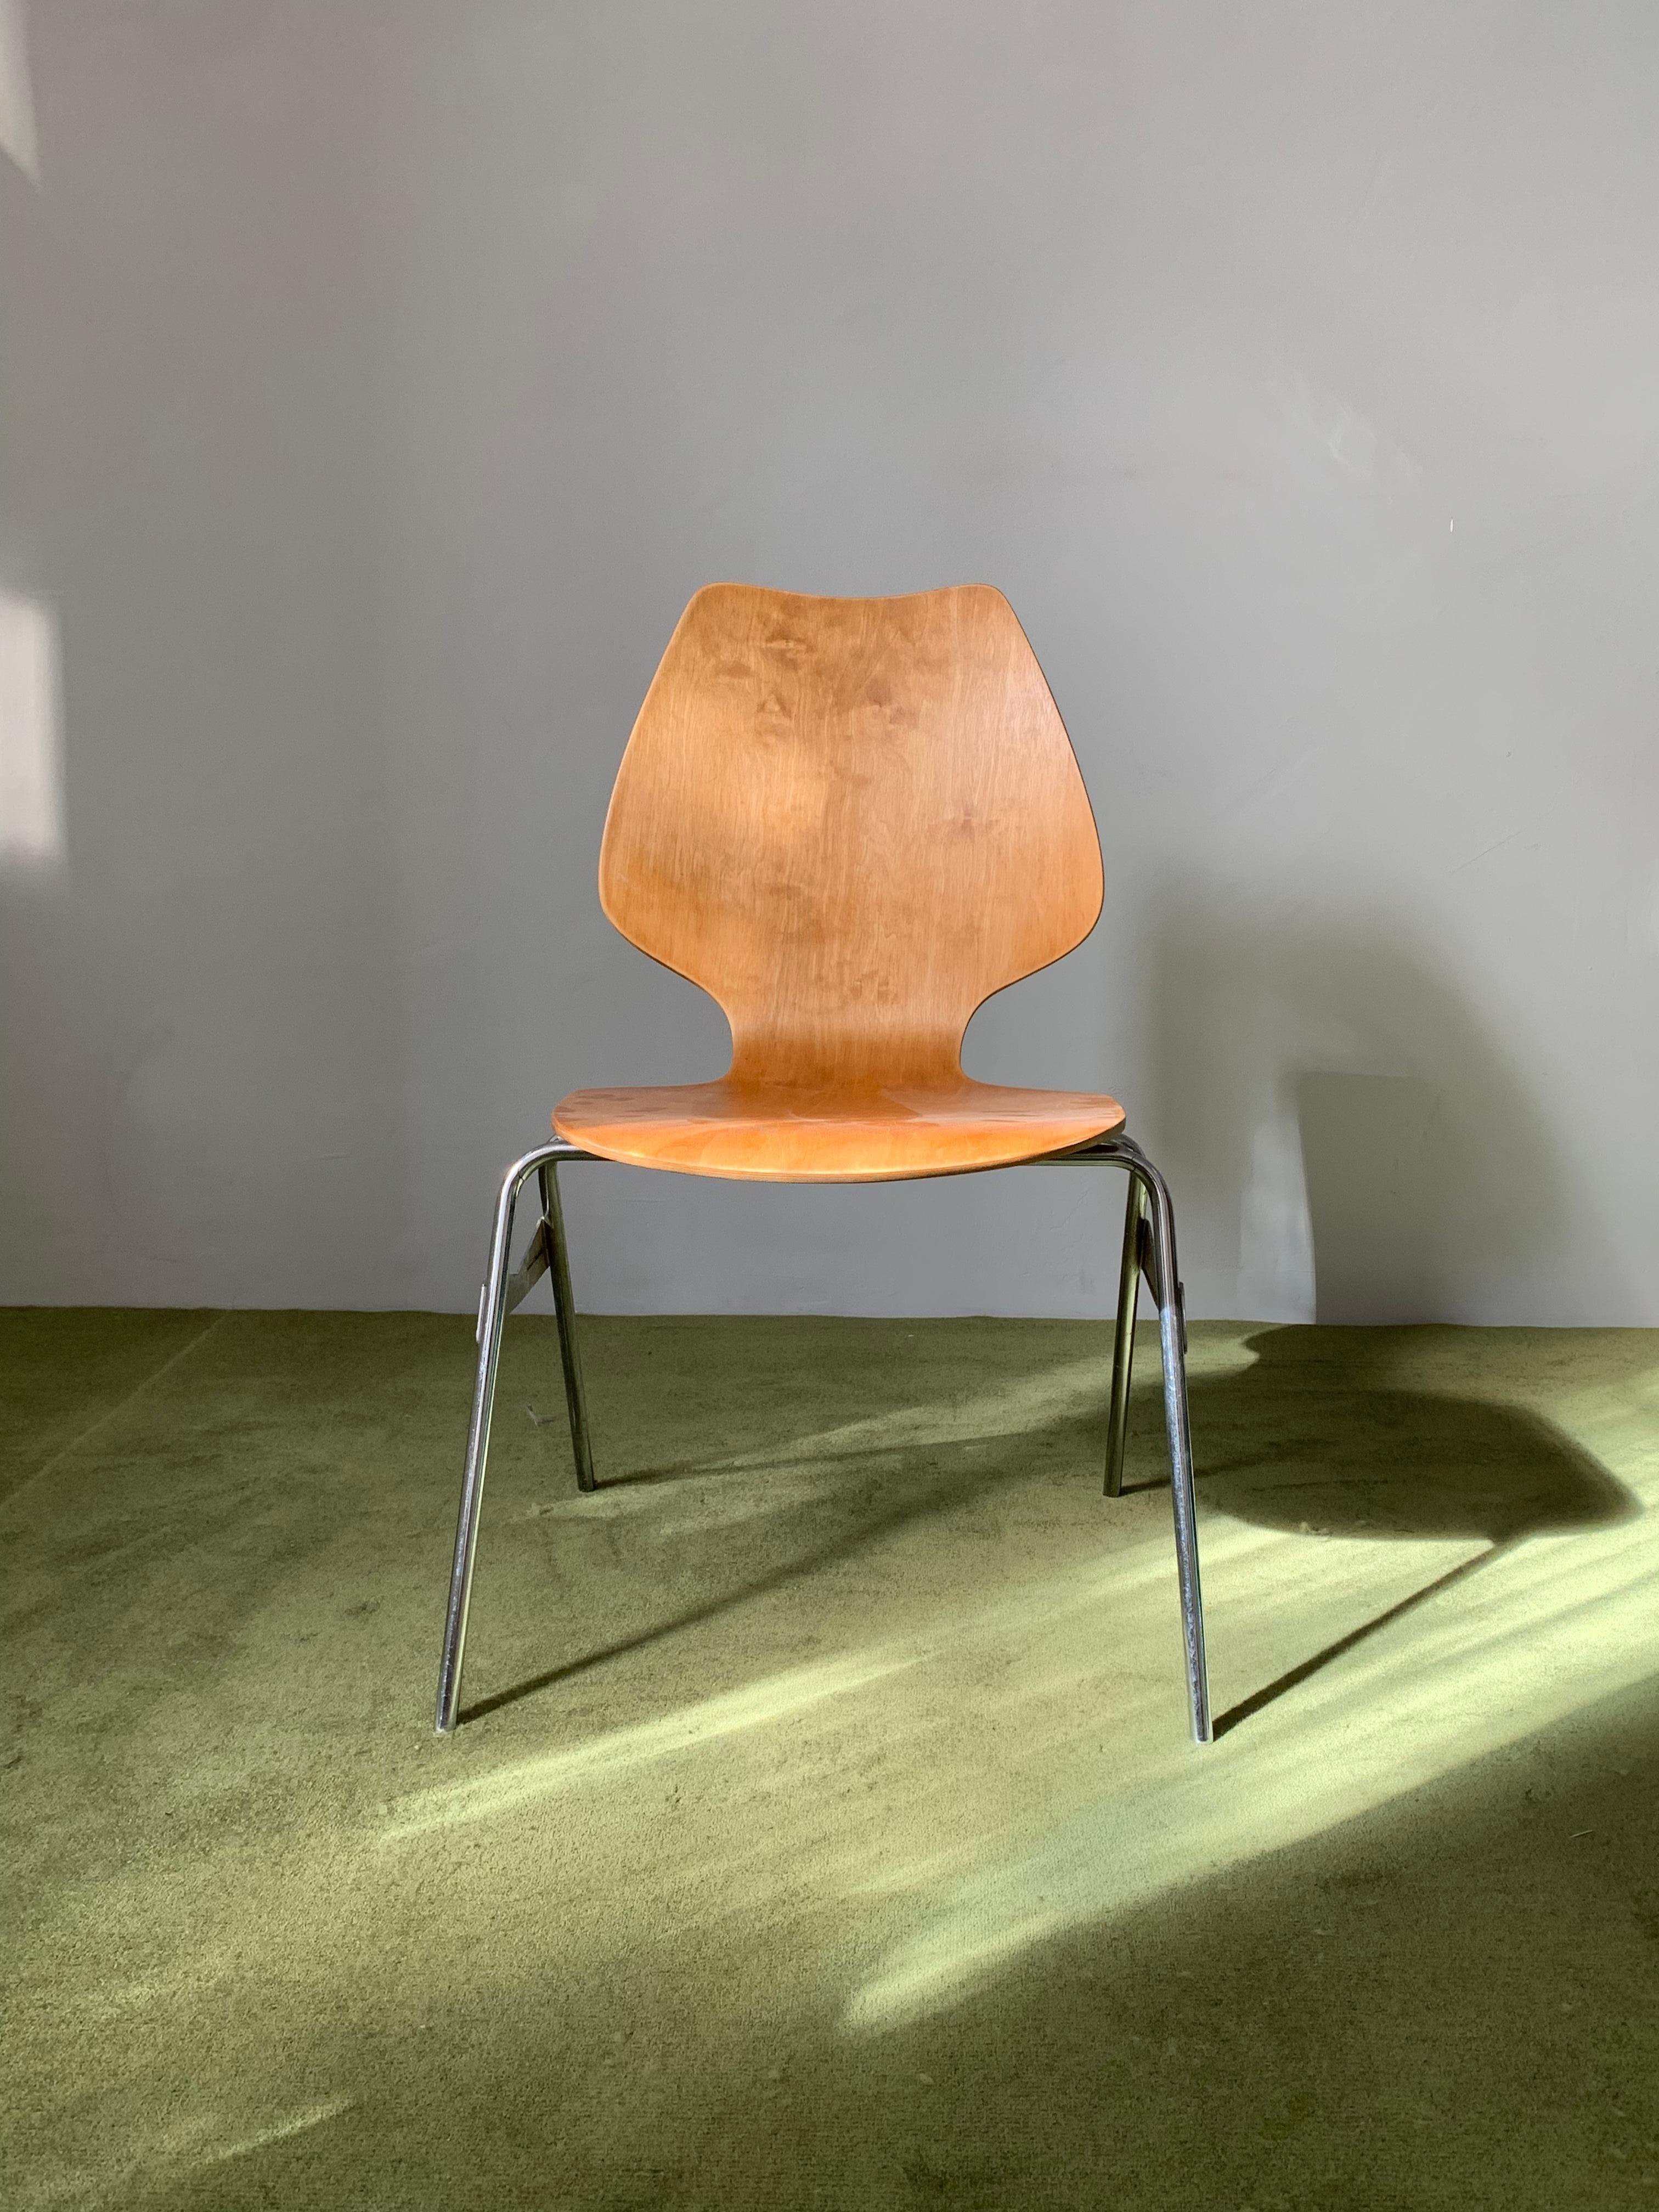 Vintage Swiss Industrial  Design Plywood Stacking Chair by Horgen Glarus 1960's For Sale 2